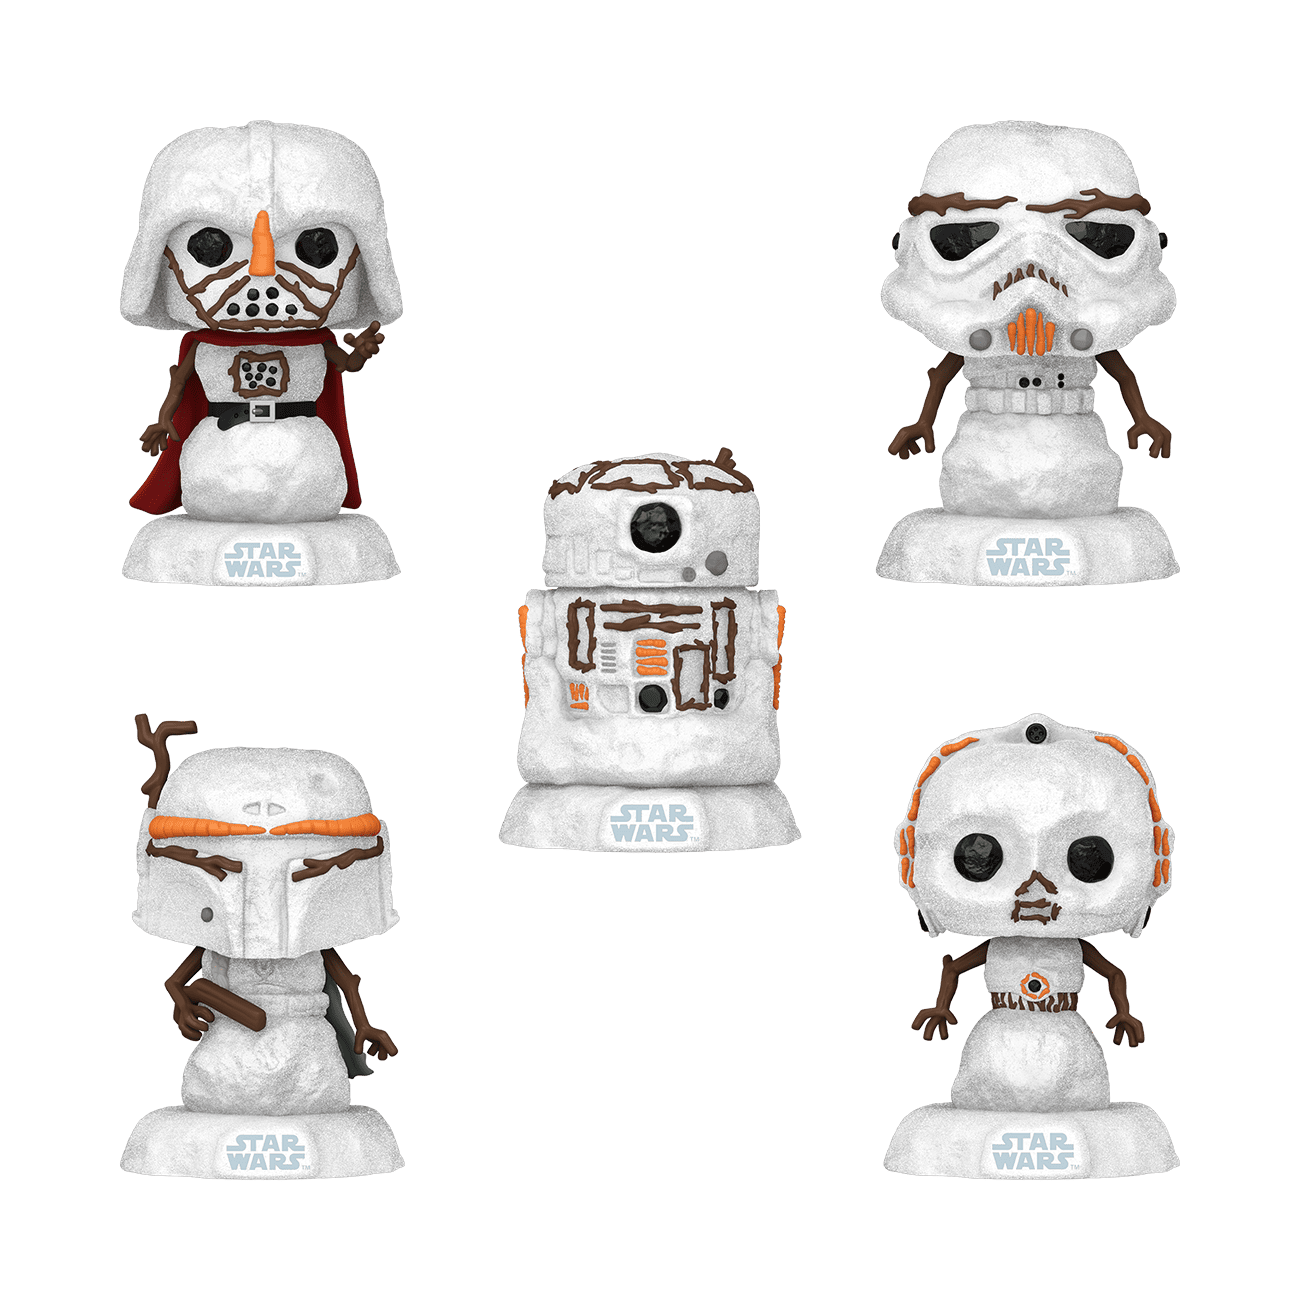 Buy Pop! Star Wars Holiday Snowman 5-Pack at Funko.